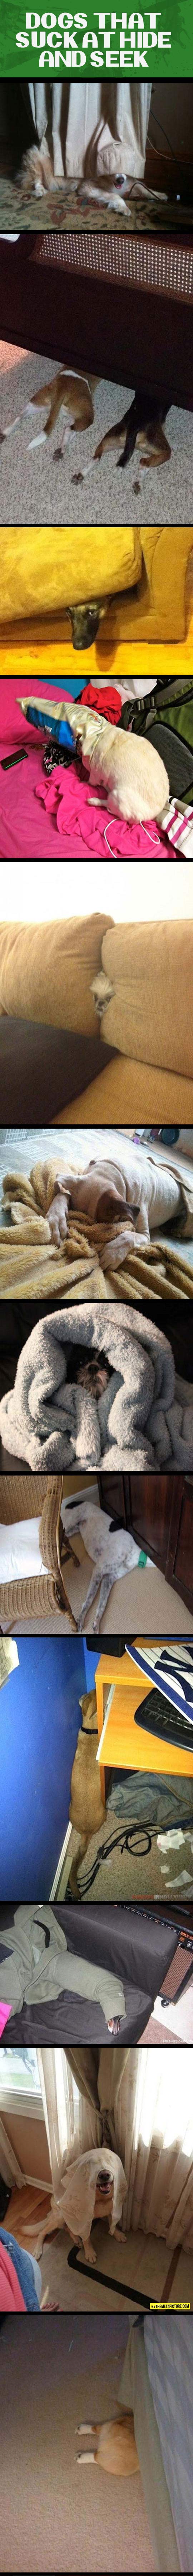 Dogs that are really bad at hide and seek...